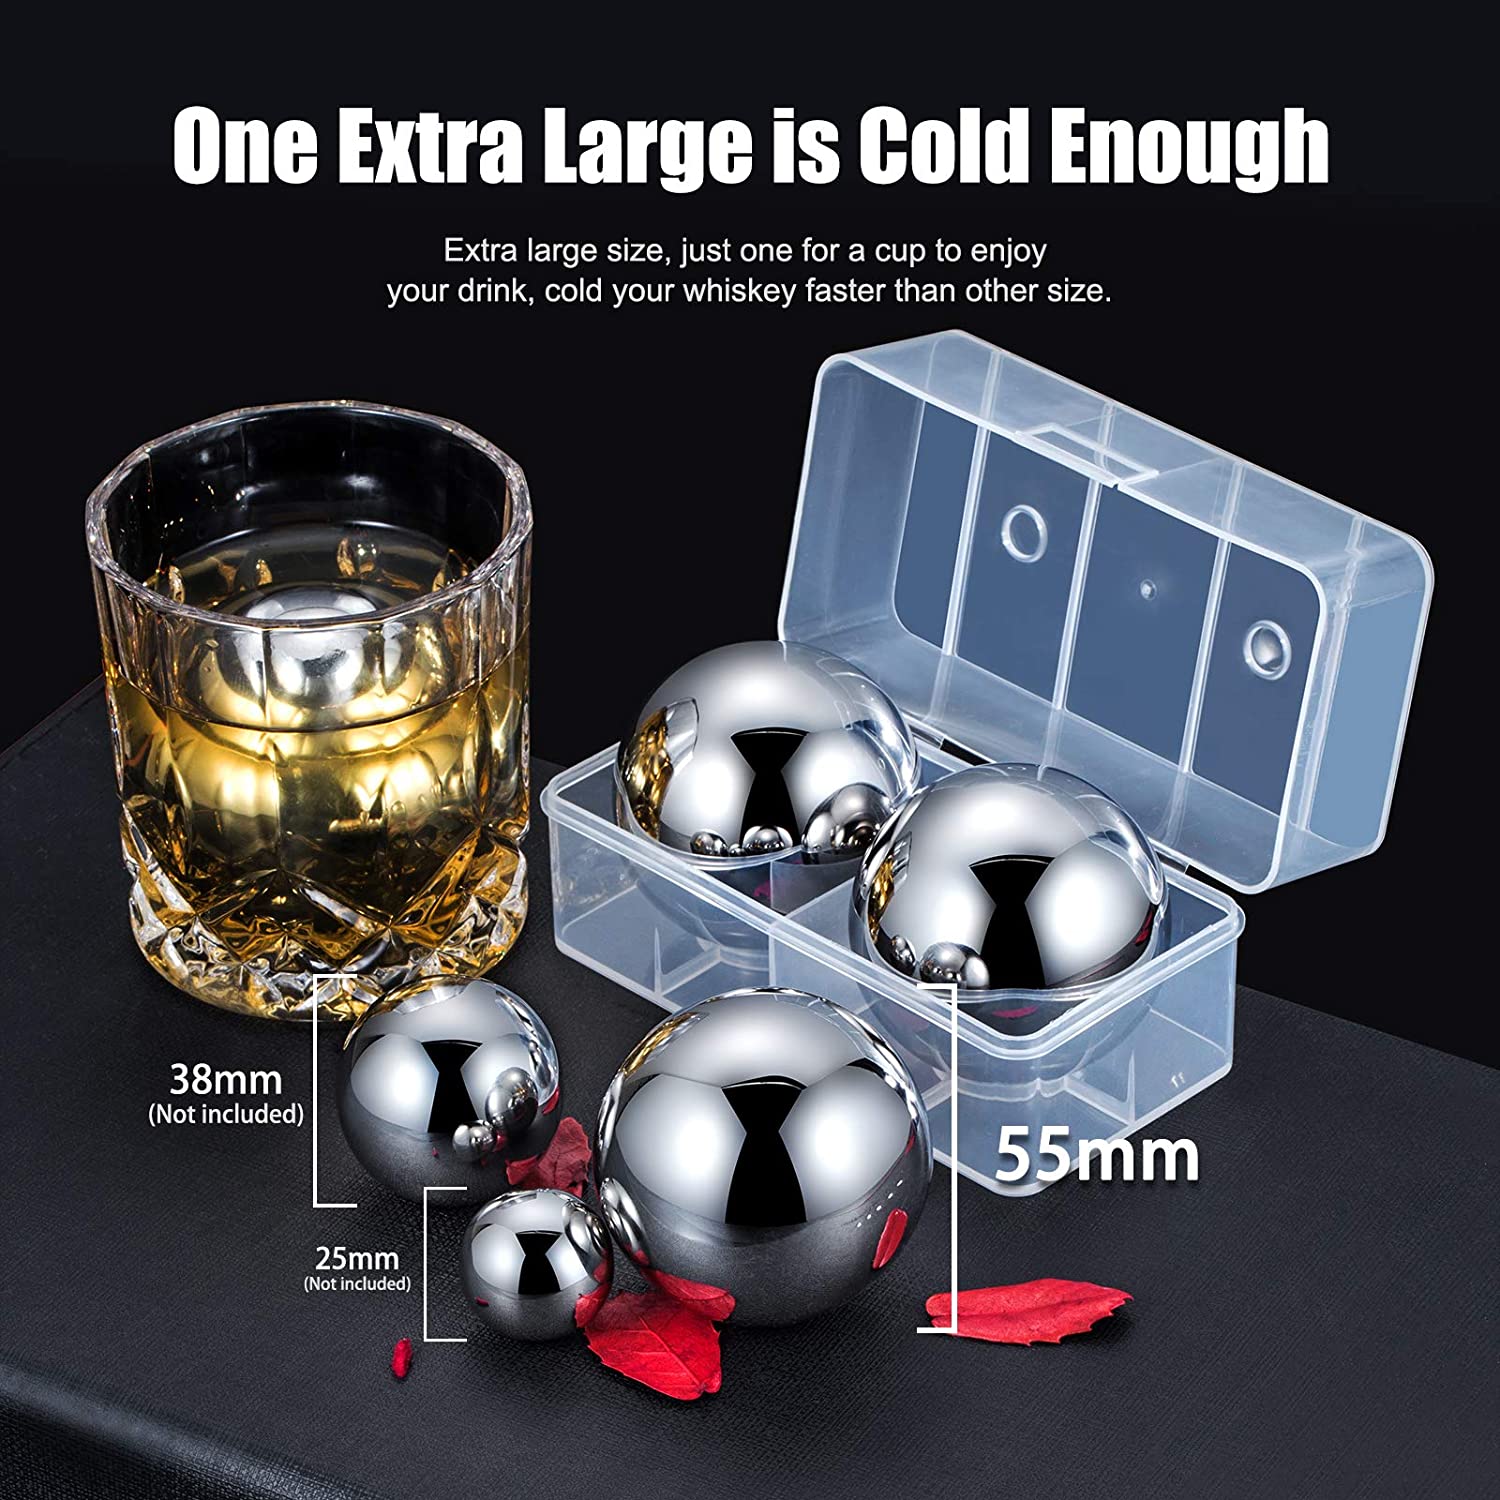 Stainless Steel Chilling Spheres